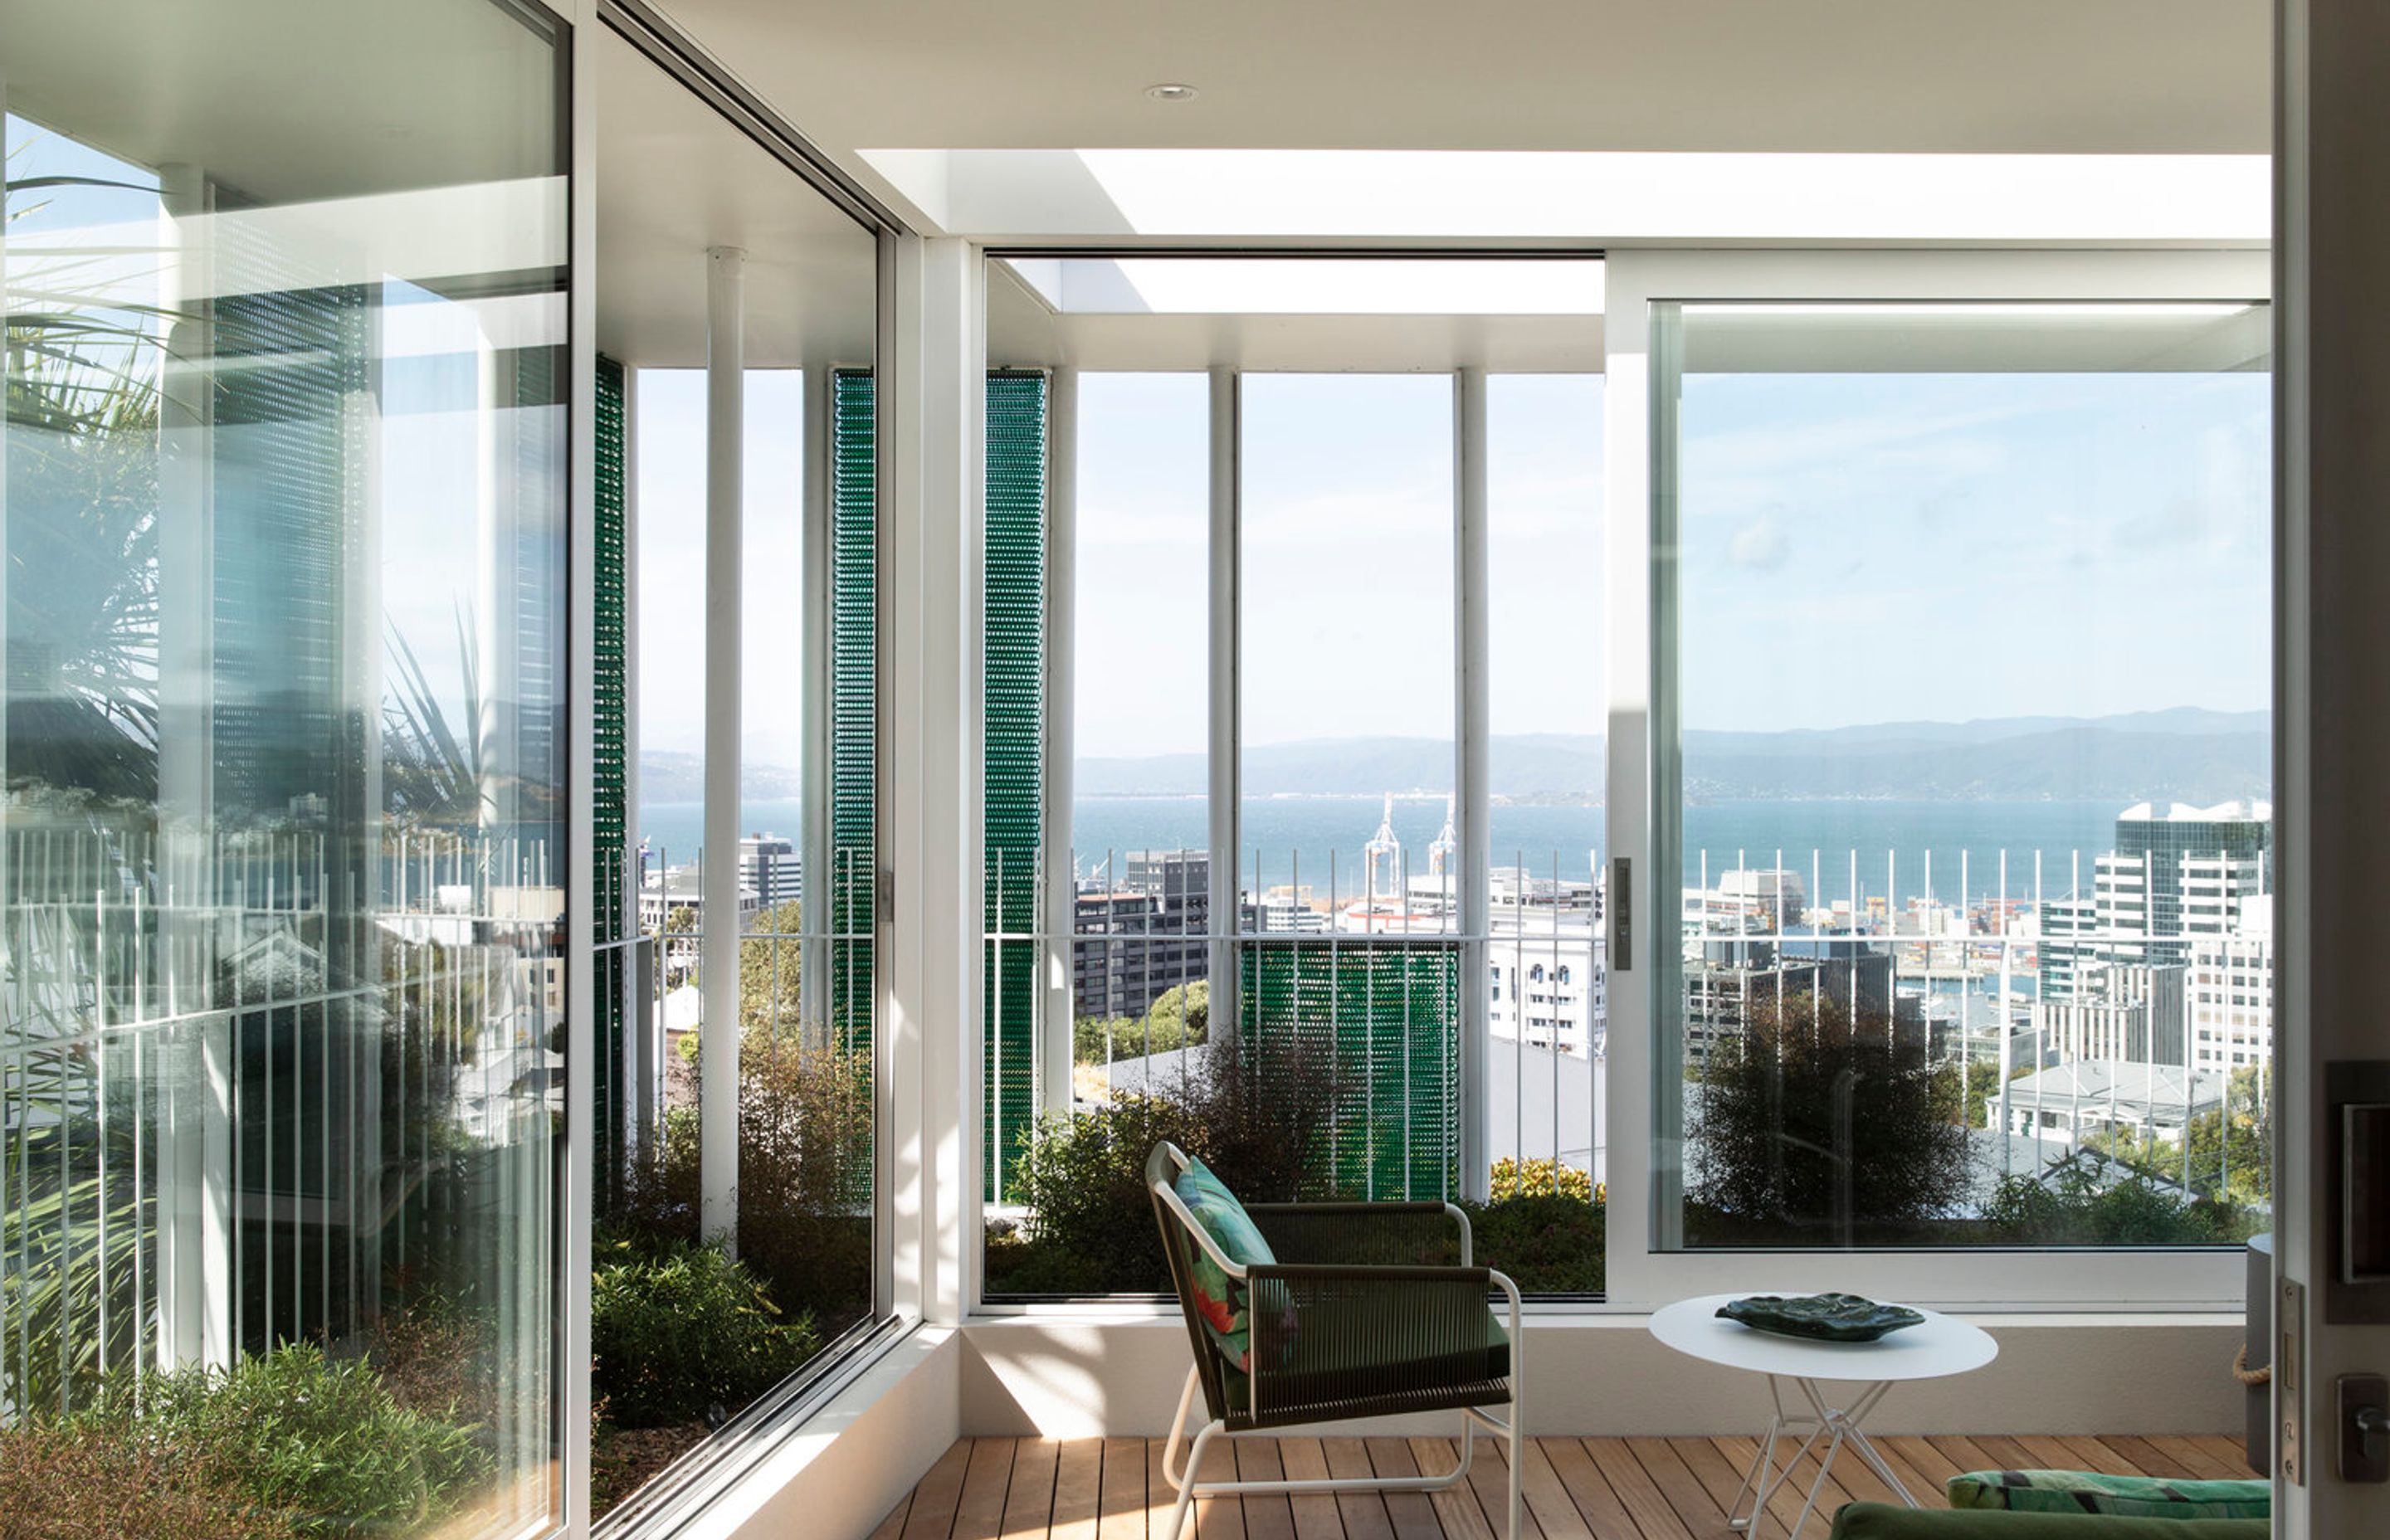 The enclosed winter garden at Salmont Place apartments provides warmth and shelter from the wind and rain, while still allowing the occupants to enjoy the magnificent view over Wellington Harbour. Photograph by David Straight.